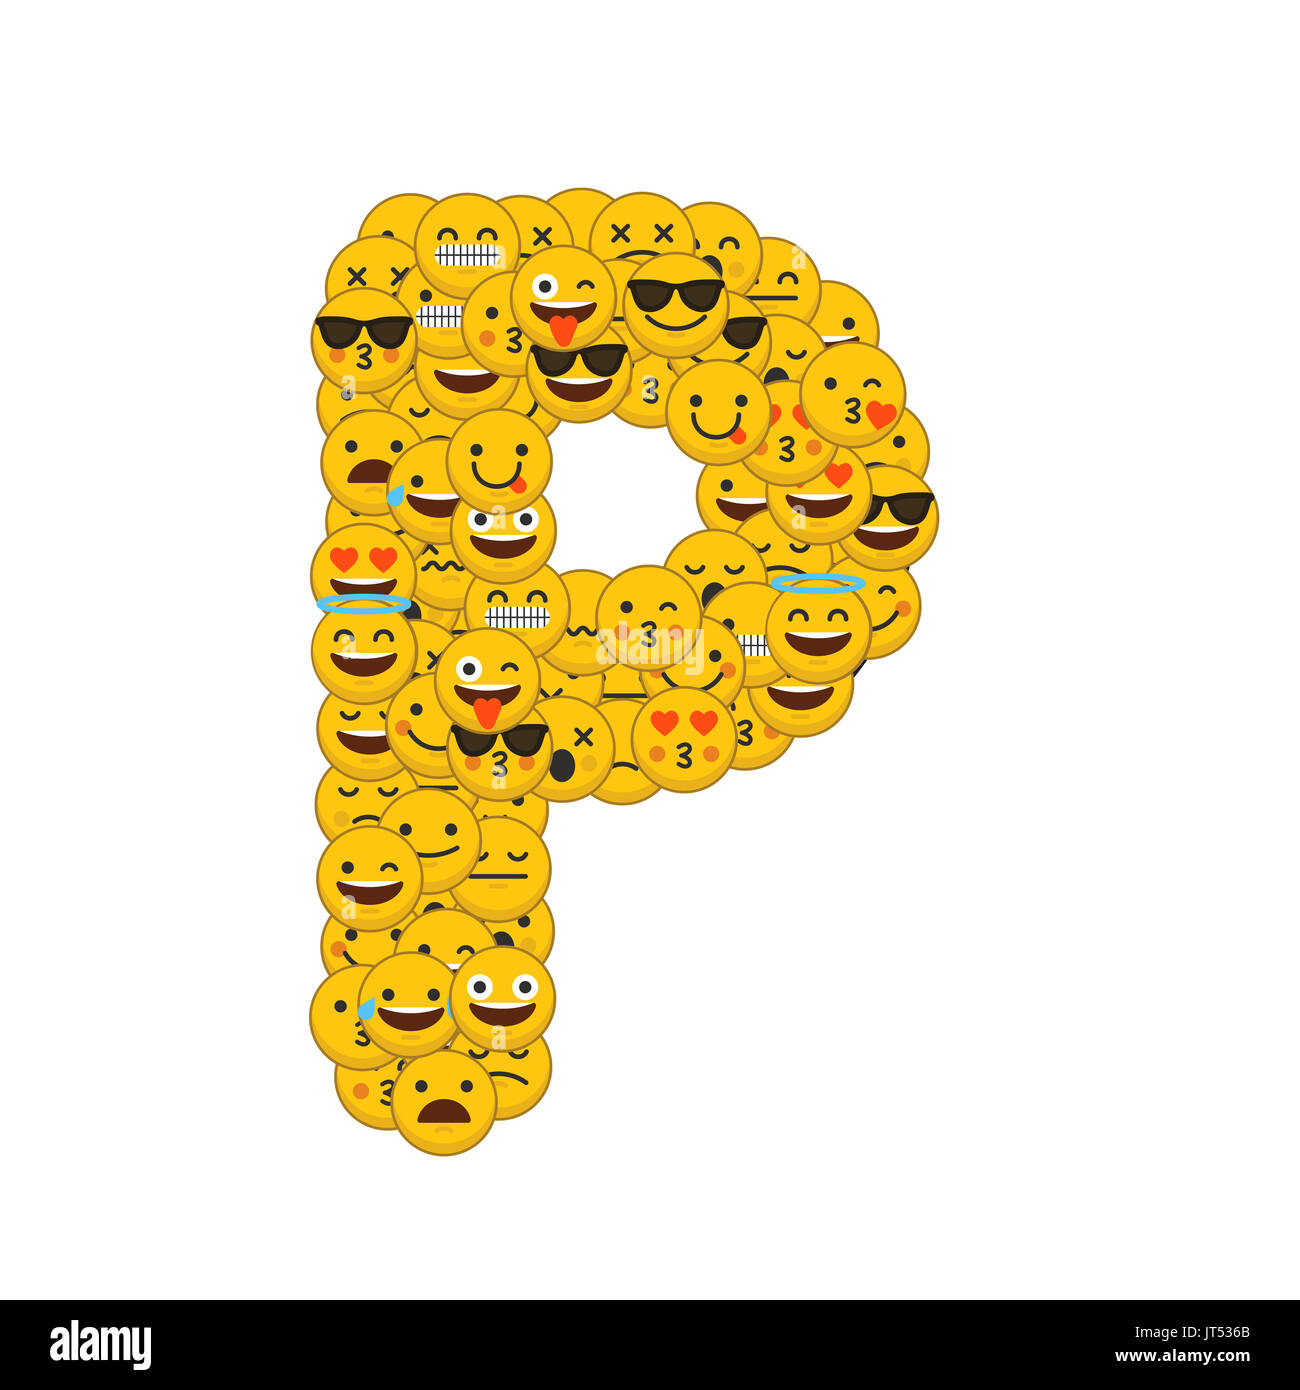 Emoji smiley characters capital letter P Stock Photo